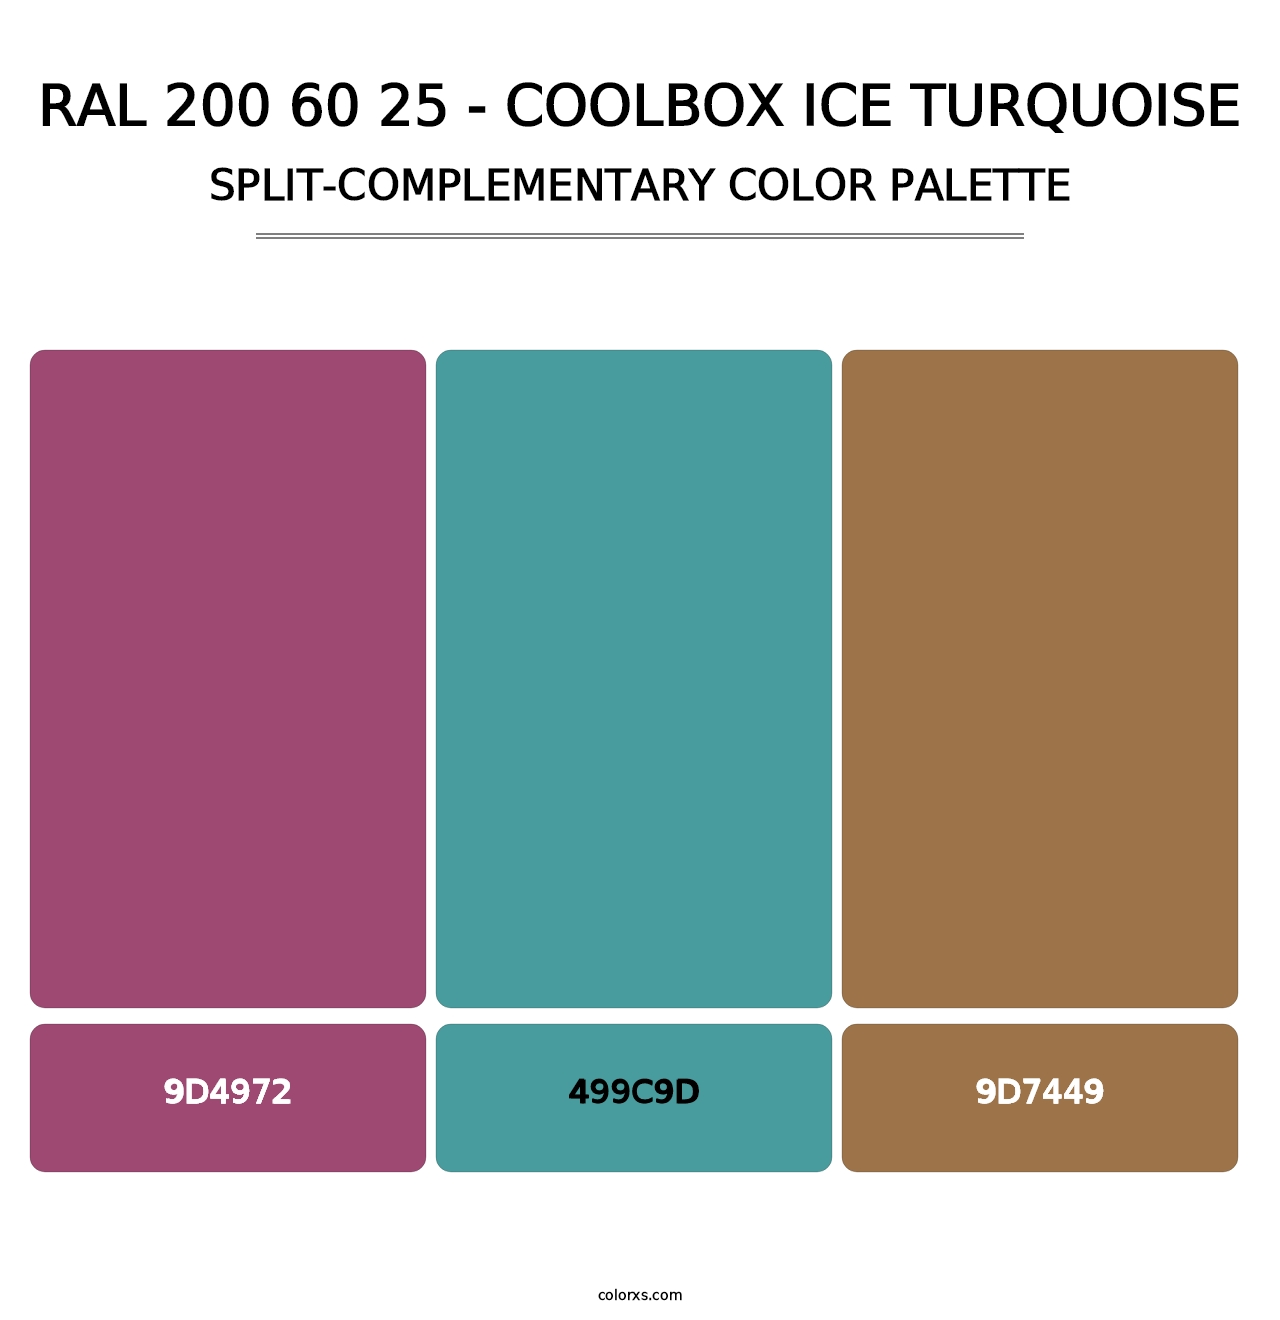 RAL 200 60 25 - Coolbox Ice Turquoise - Split-Complementary Color Palette